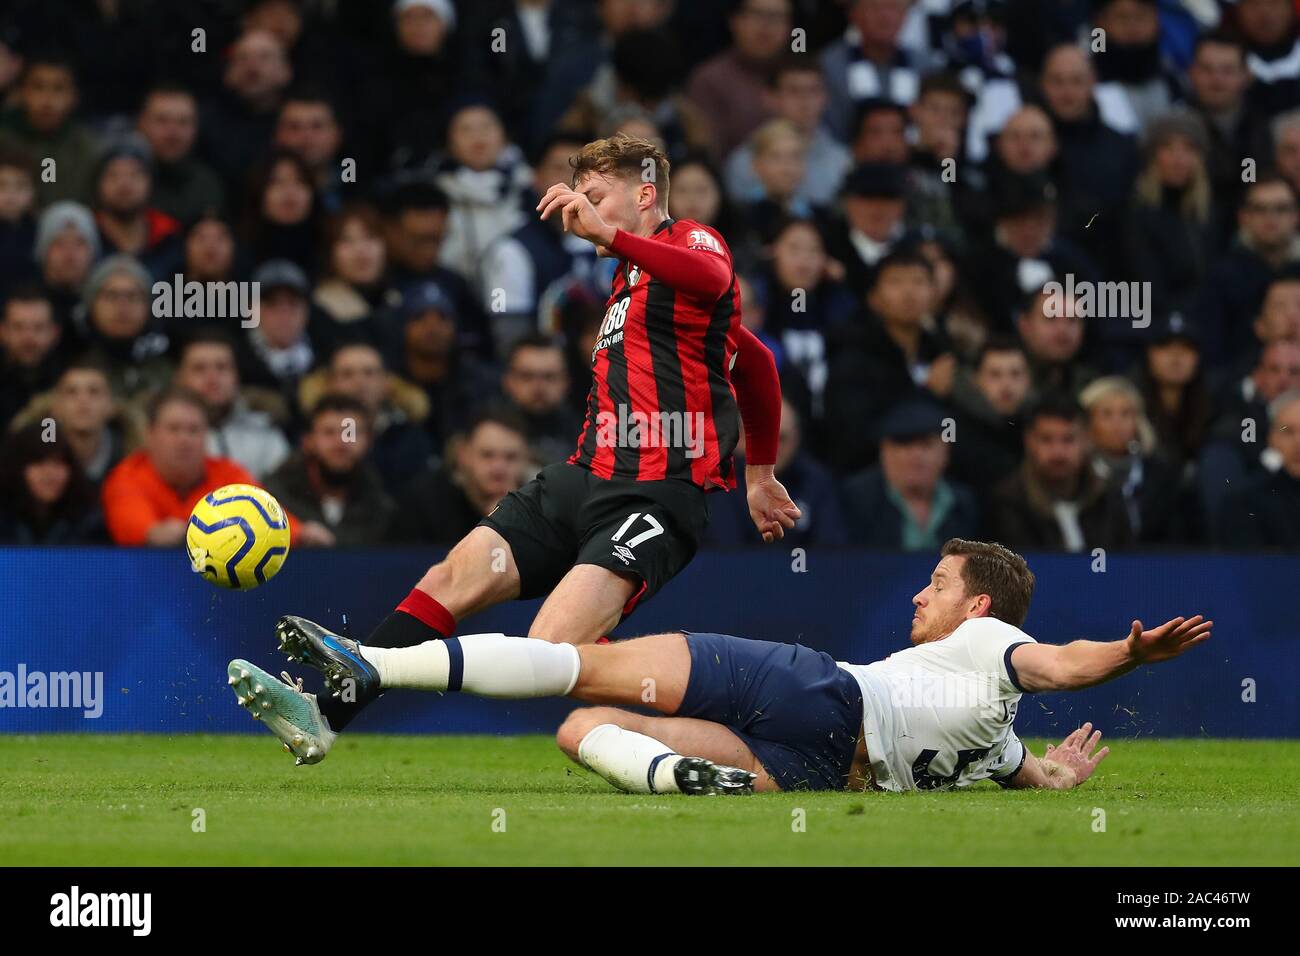 Bournemouth's defender Jack Stacey and Tottenham's defender Jan Vertonghen compete for the ball during the Barclays Premier League match between Tottenham Hotspur and Bournemouth at the Tottenham Hotspur Stadium, London, England. On the 30th November 2019. (Photo by AFS/Espa-Images) Stock Photo